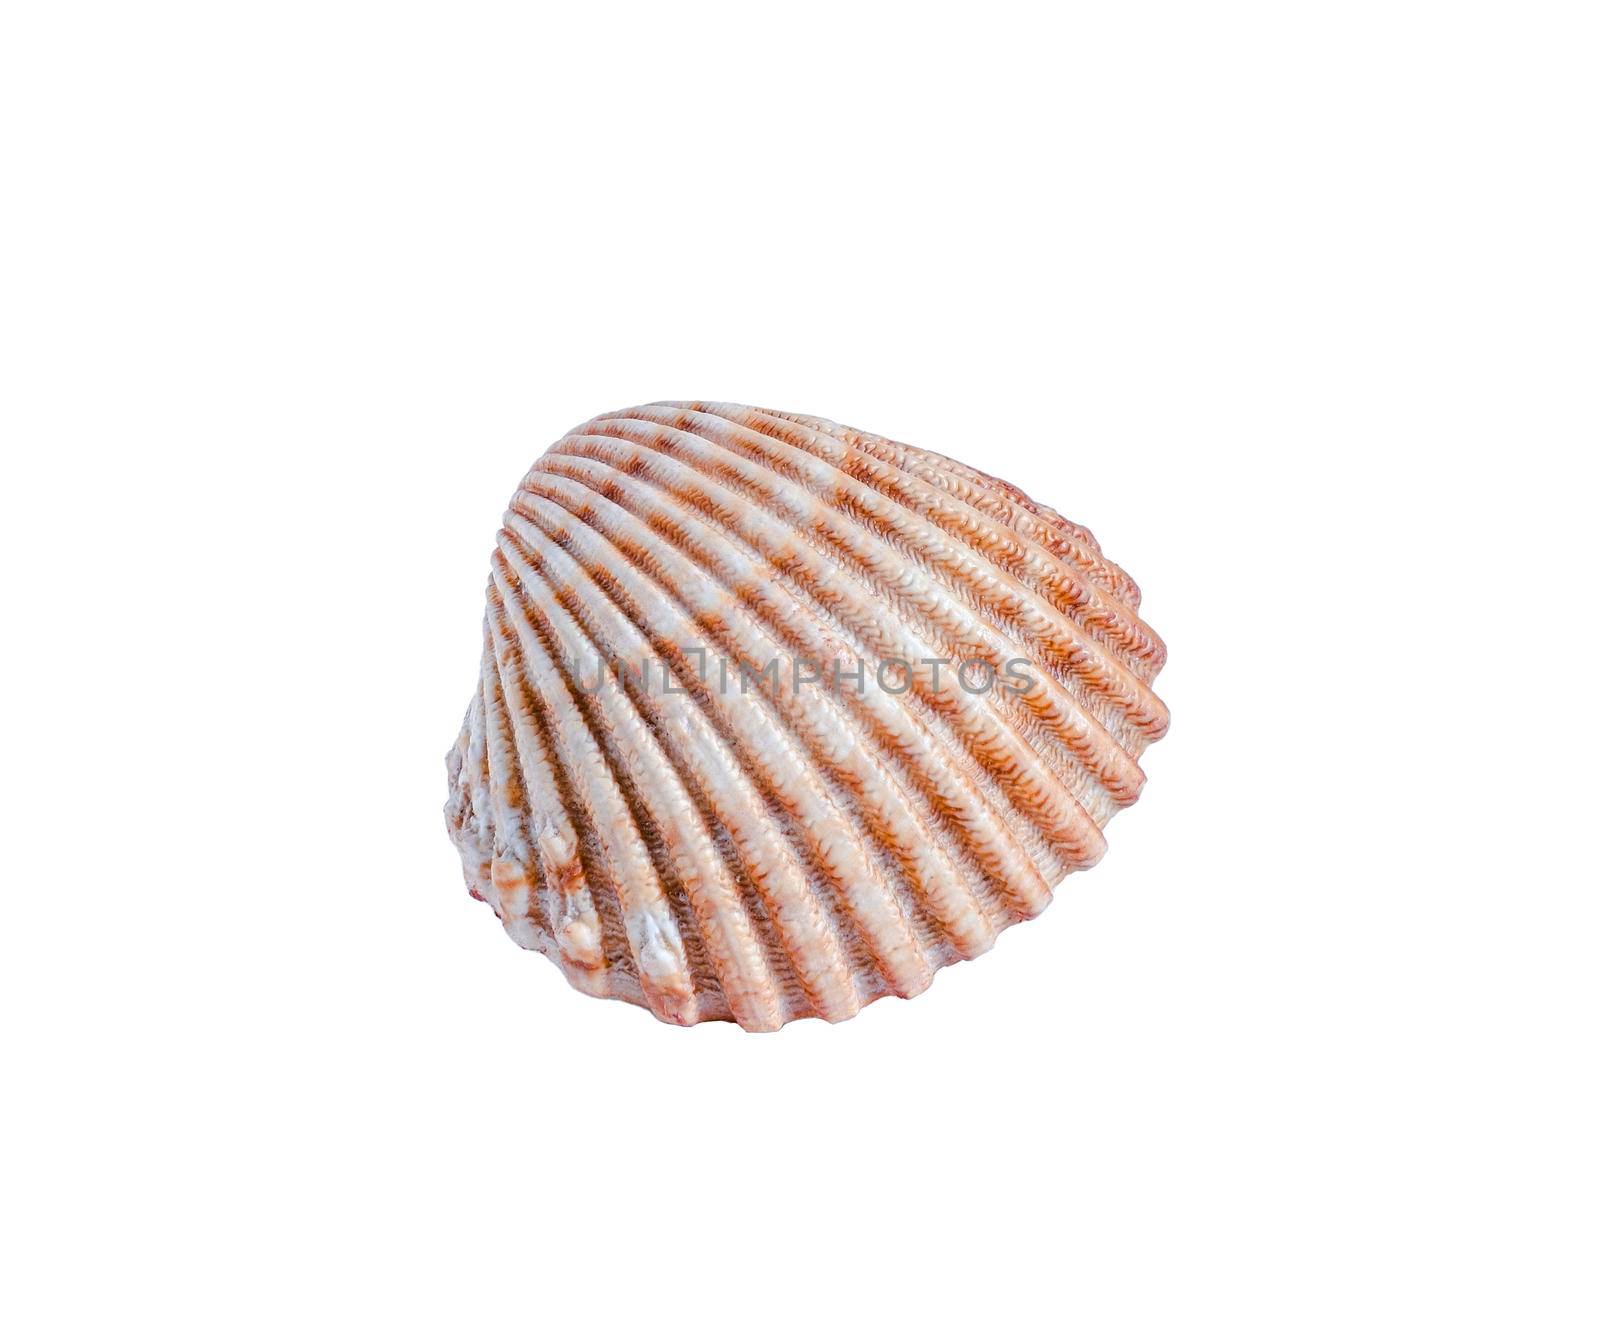 Seashell isolated on white background. Close-up view.